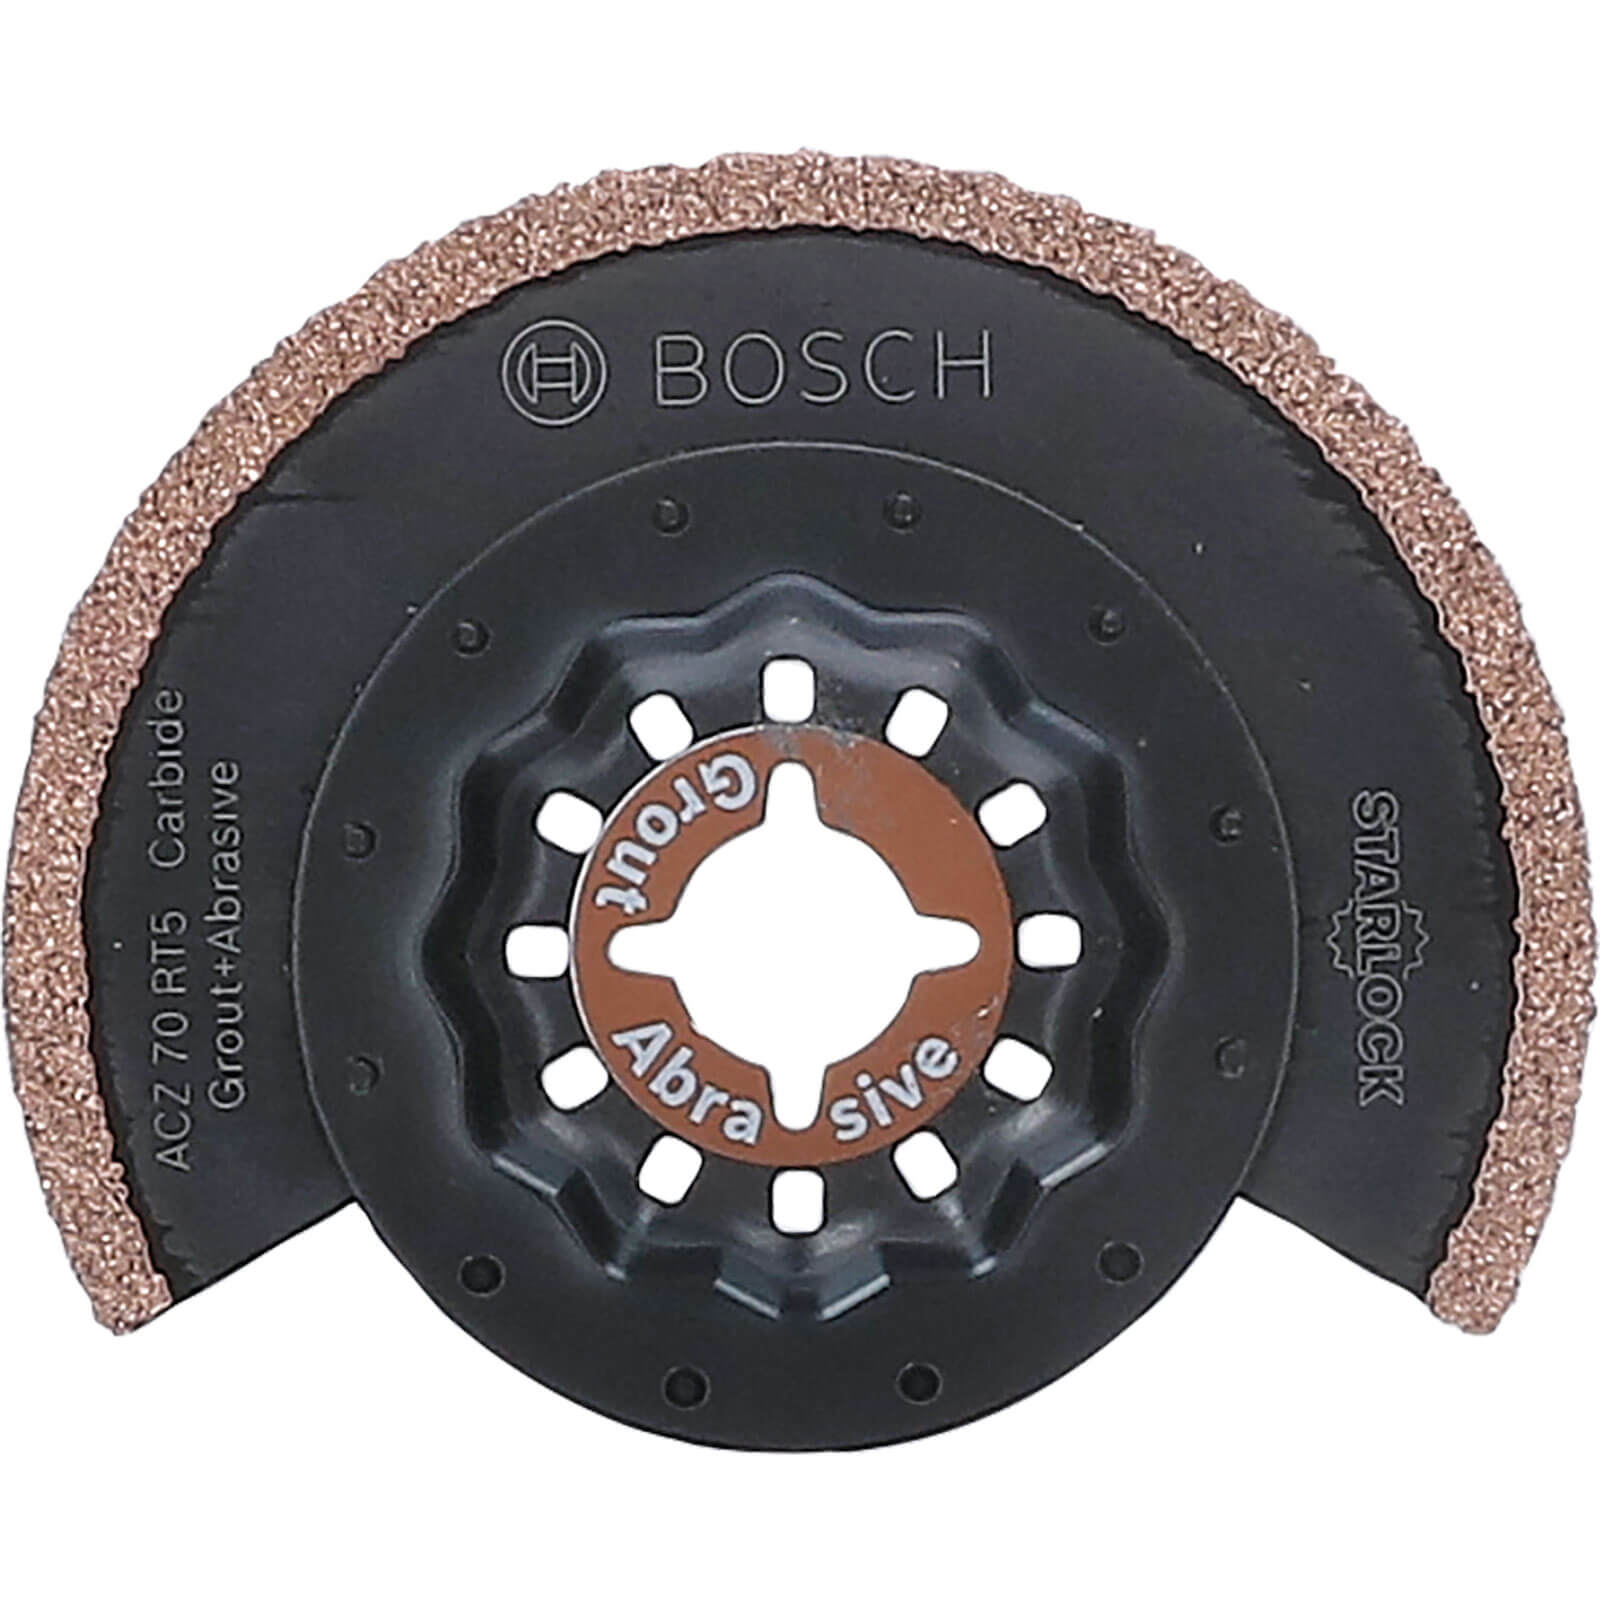 Bosch ACZ 70 RT5 Thin Grout Oscillating Multi Tool Segment Saw Blade 70mm Pack of 10